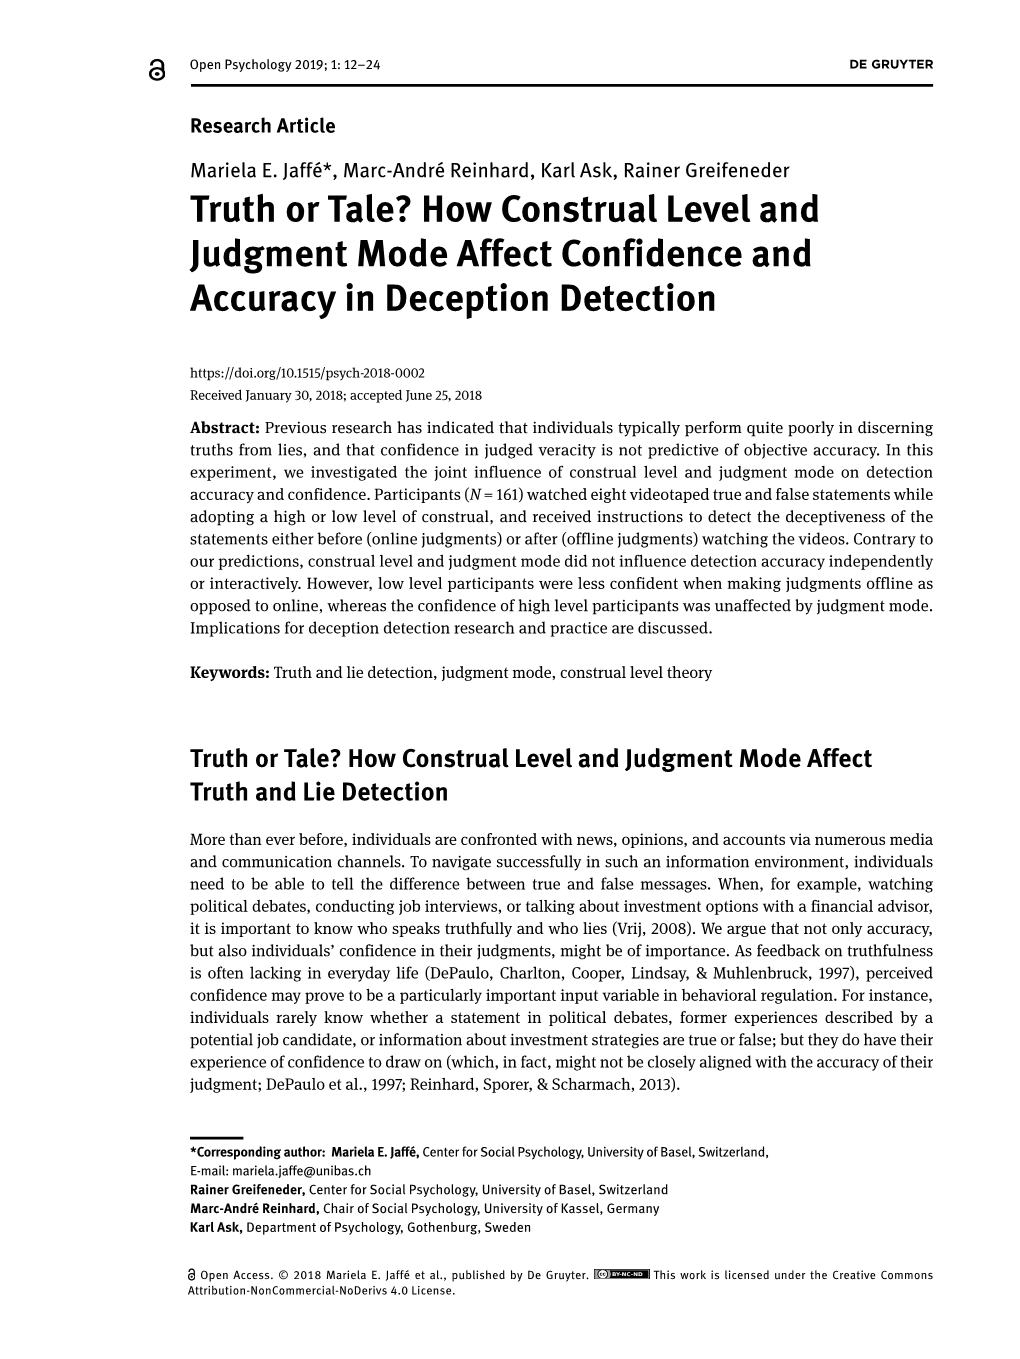 Truth Or Tale? How Construal Level and Judgment Mode Affect Confidence and Accuracy in Deception Detection